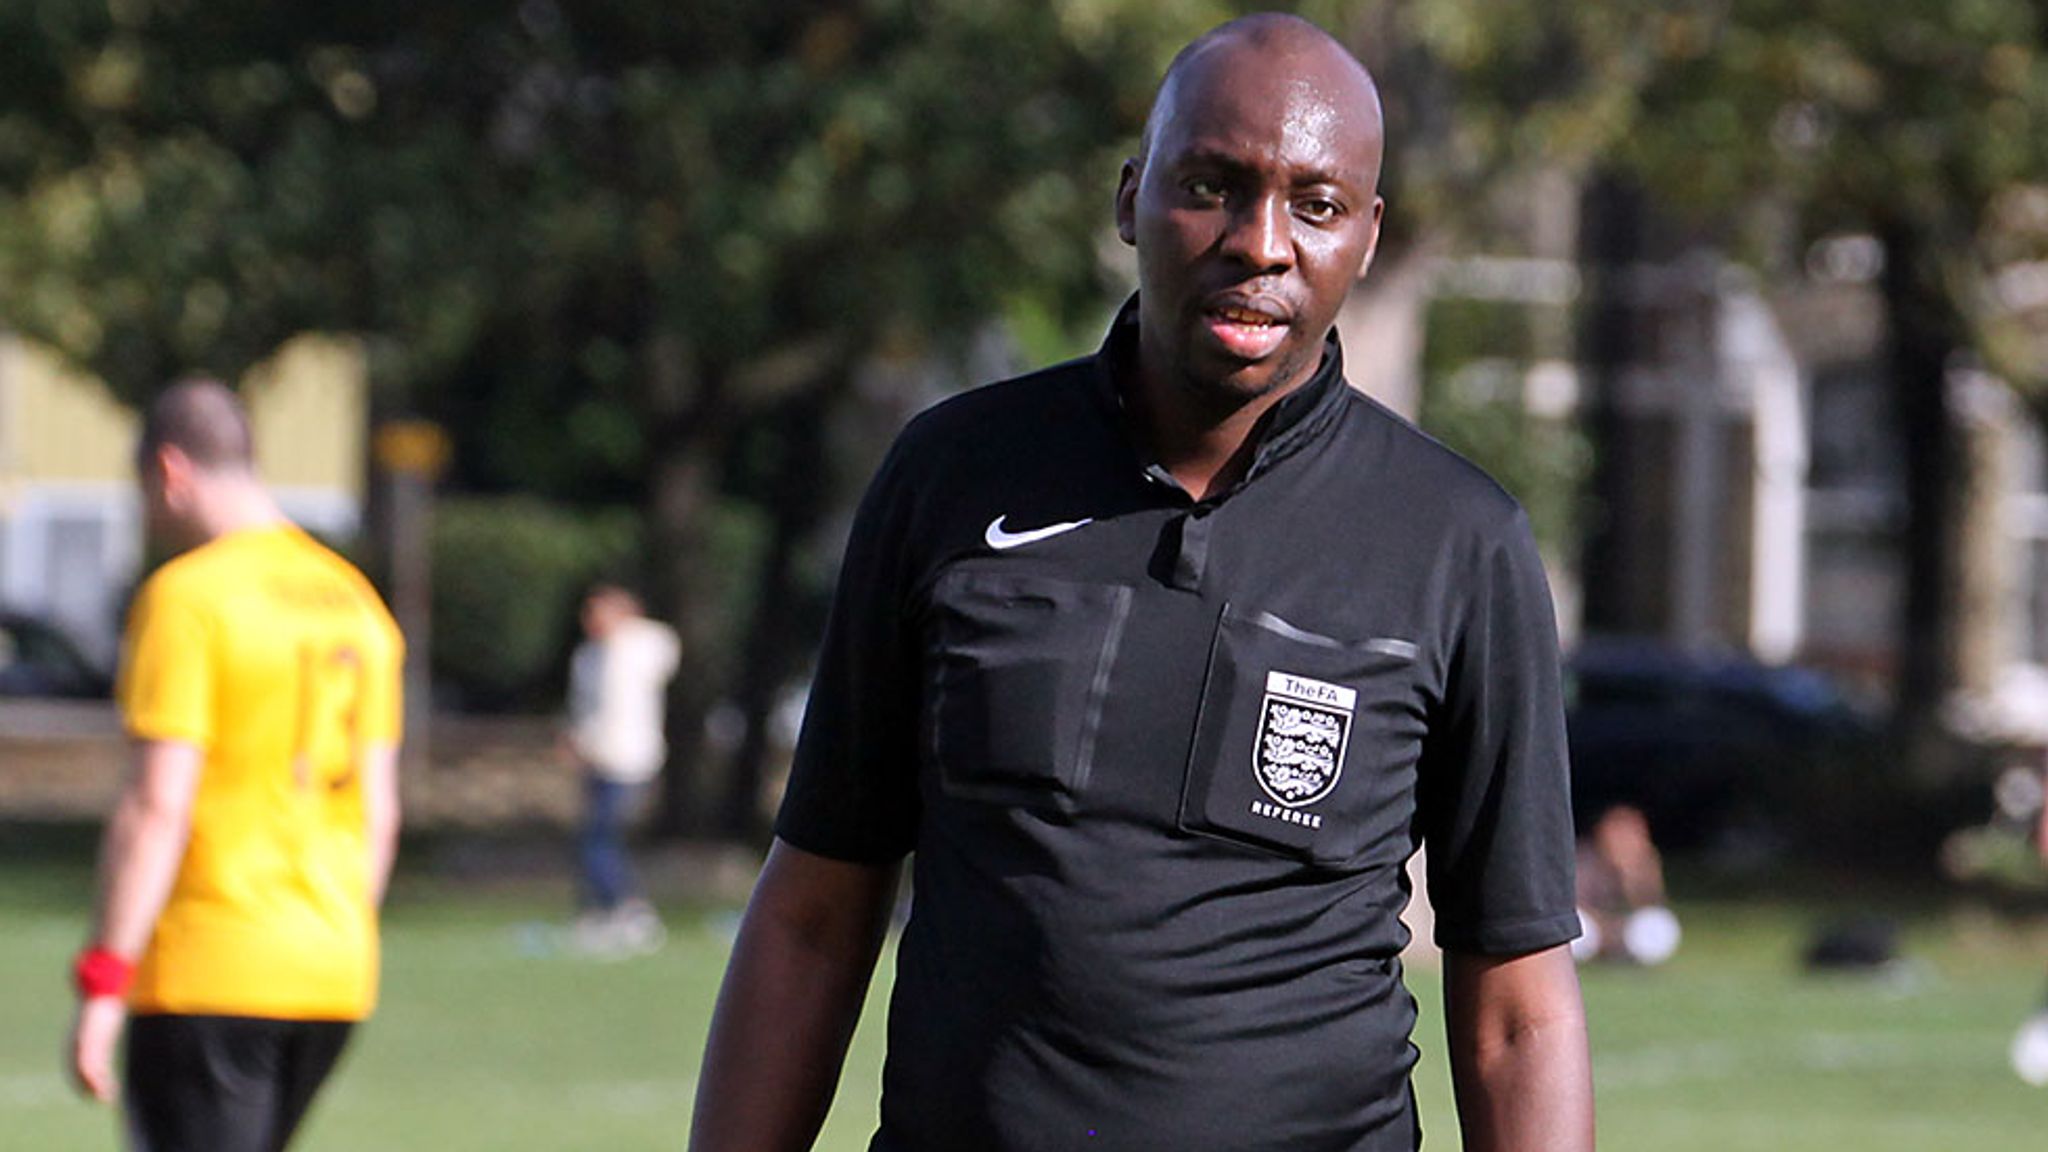 CONIFA referee seeks asylum after being publicly outed in Zimbabwe Football News Sky Sports